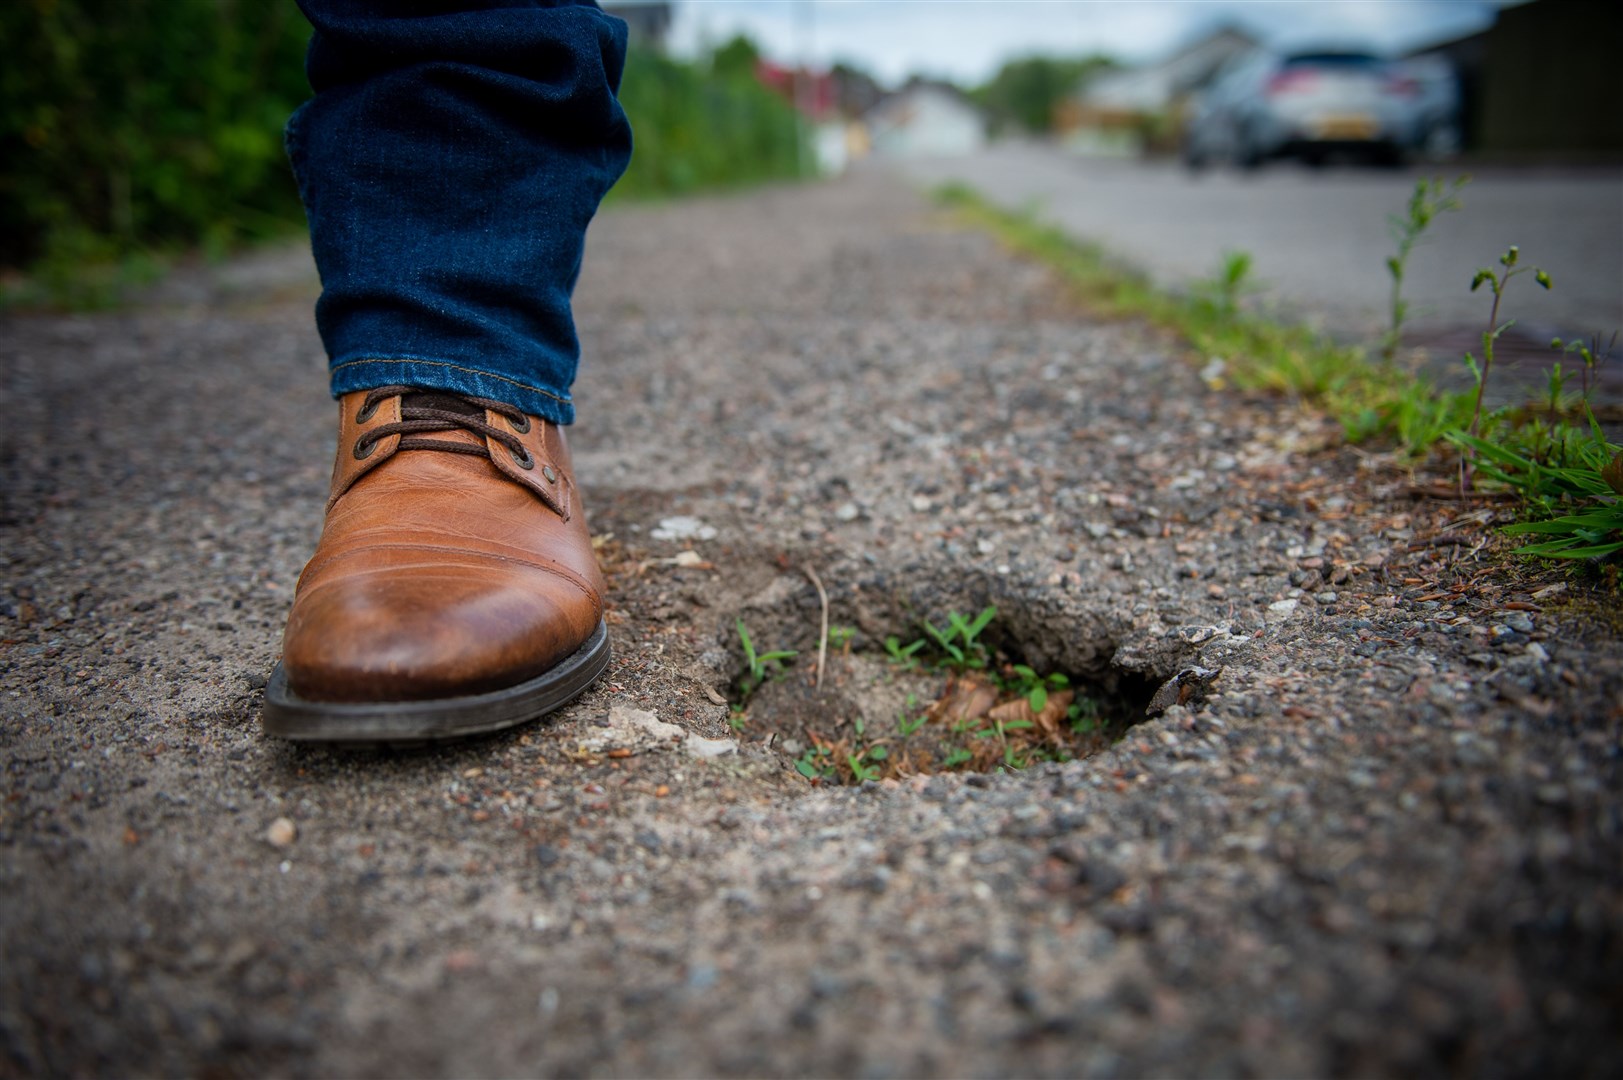 Potholes in pavements and roads are deemed a hazard.